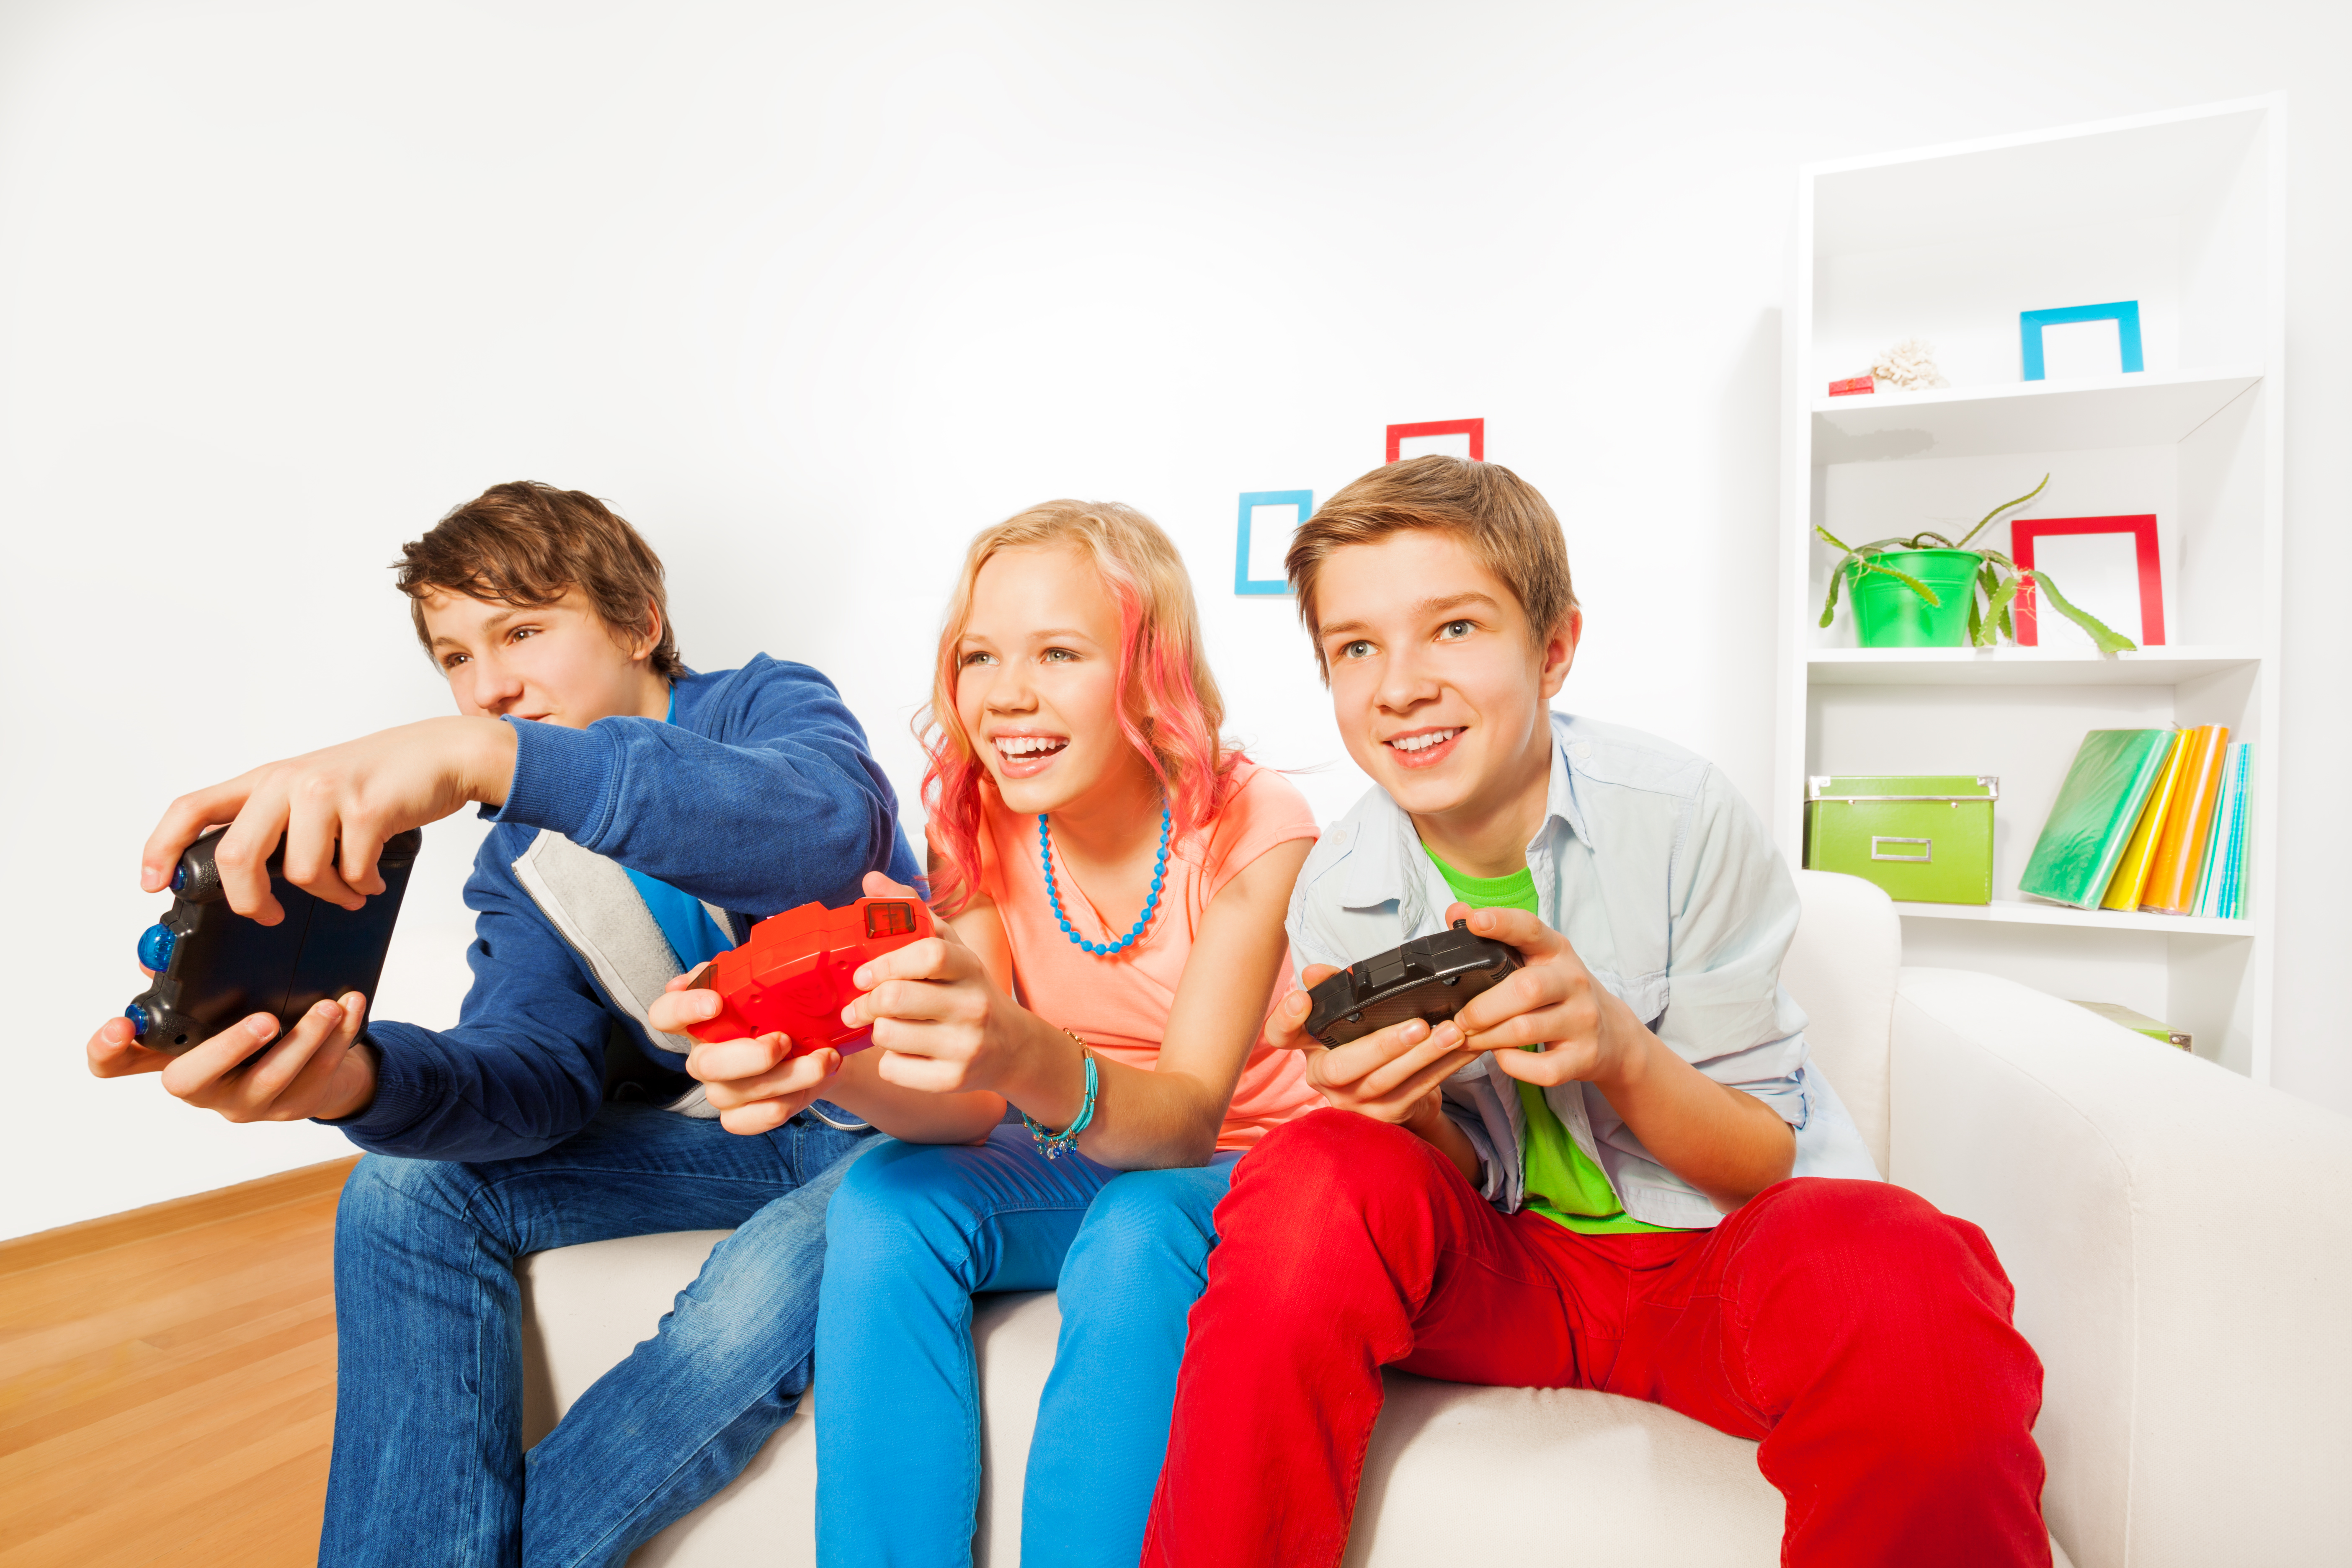 Three kids playing a video game